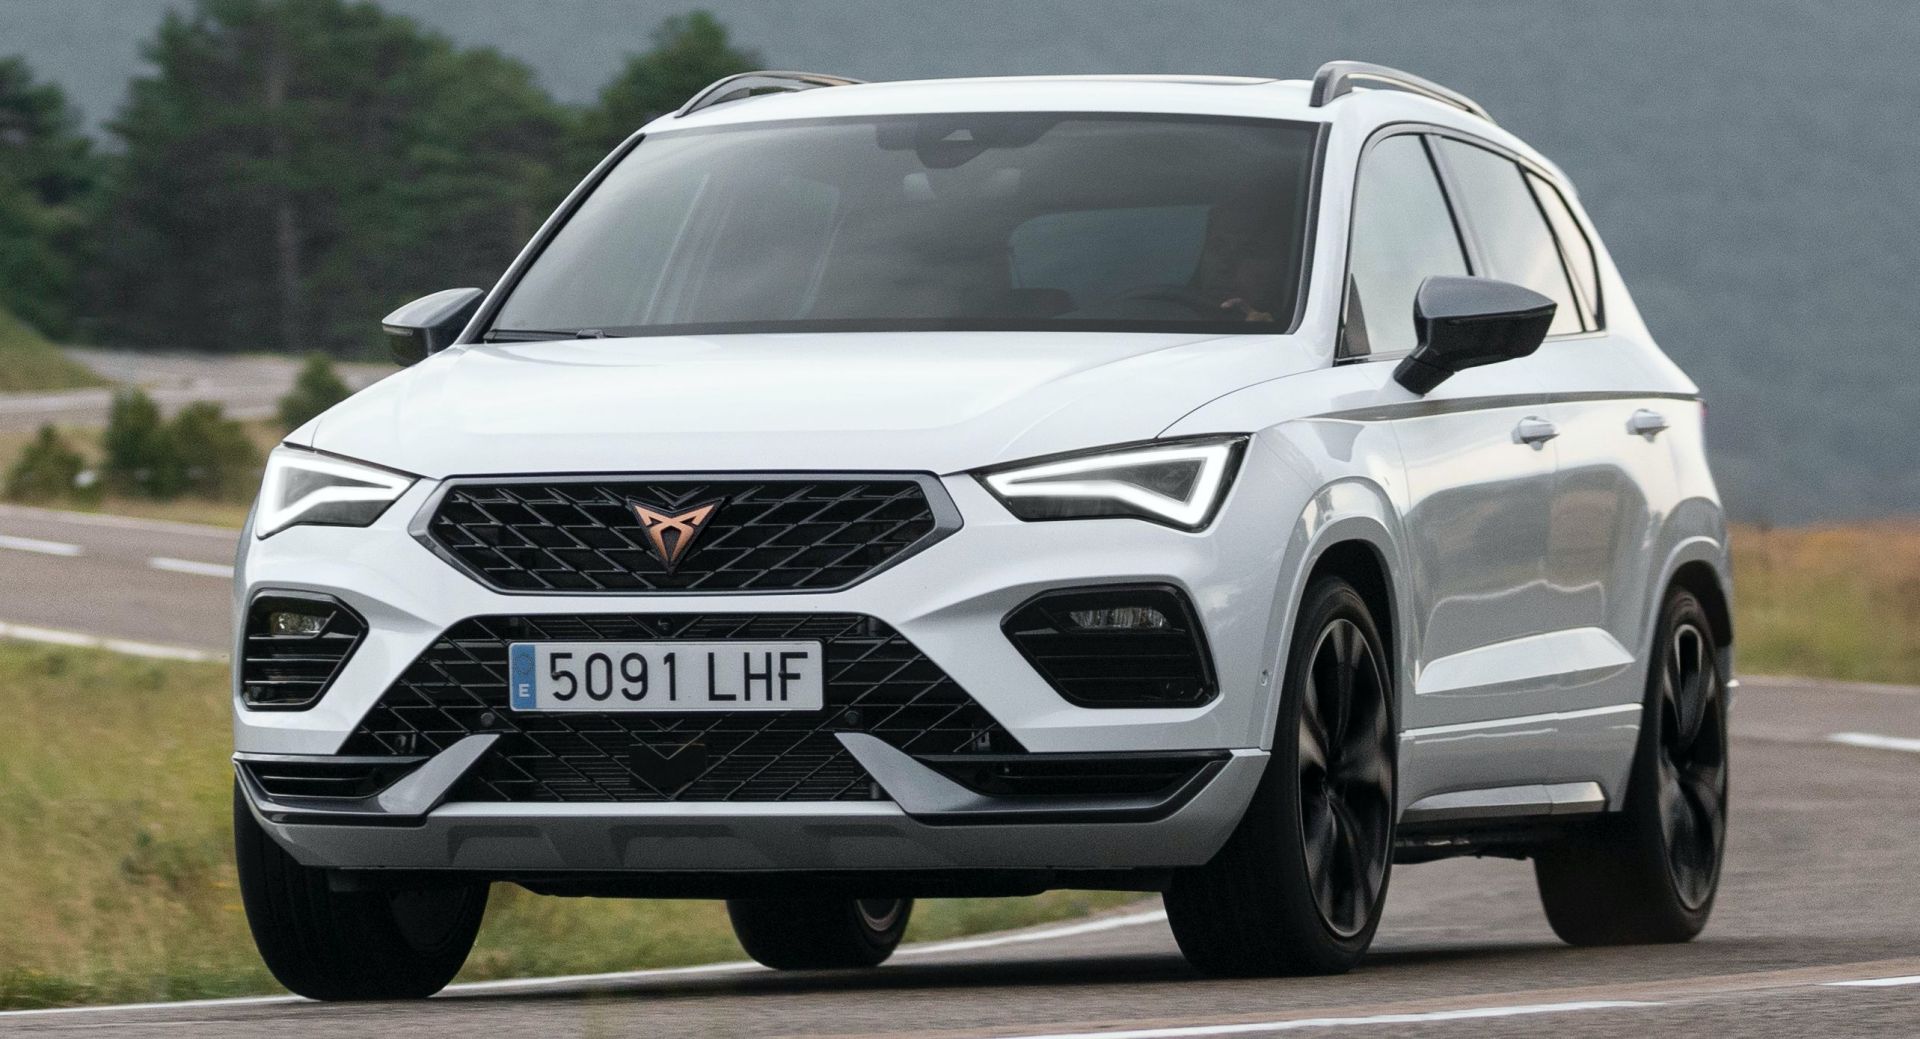 New Photos And Videos Will Help You Know SEAT's 2021 Cupra Ateca Better